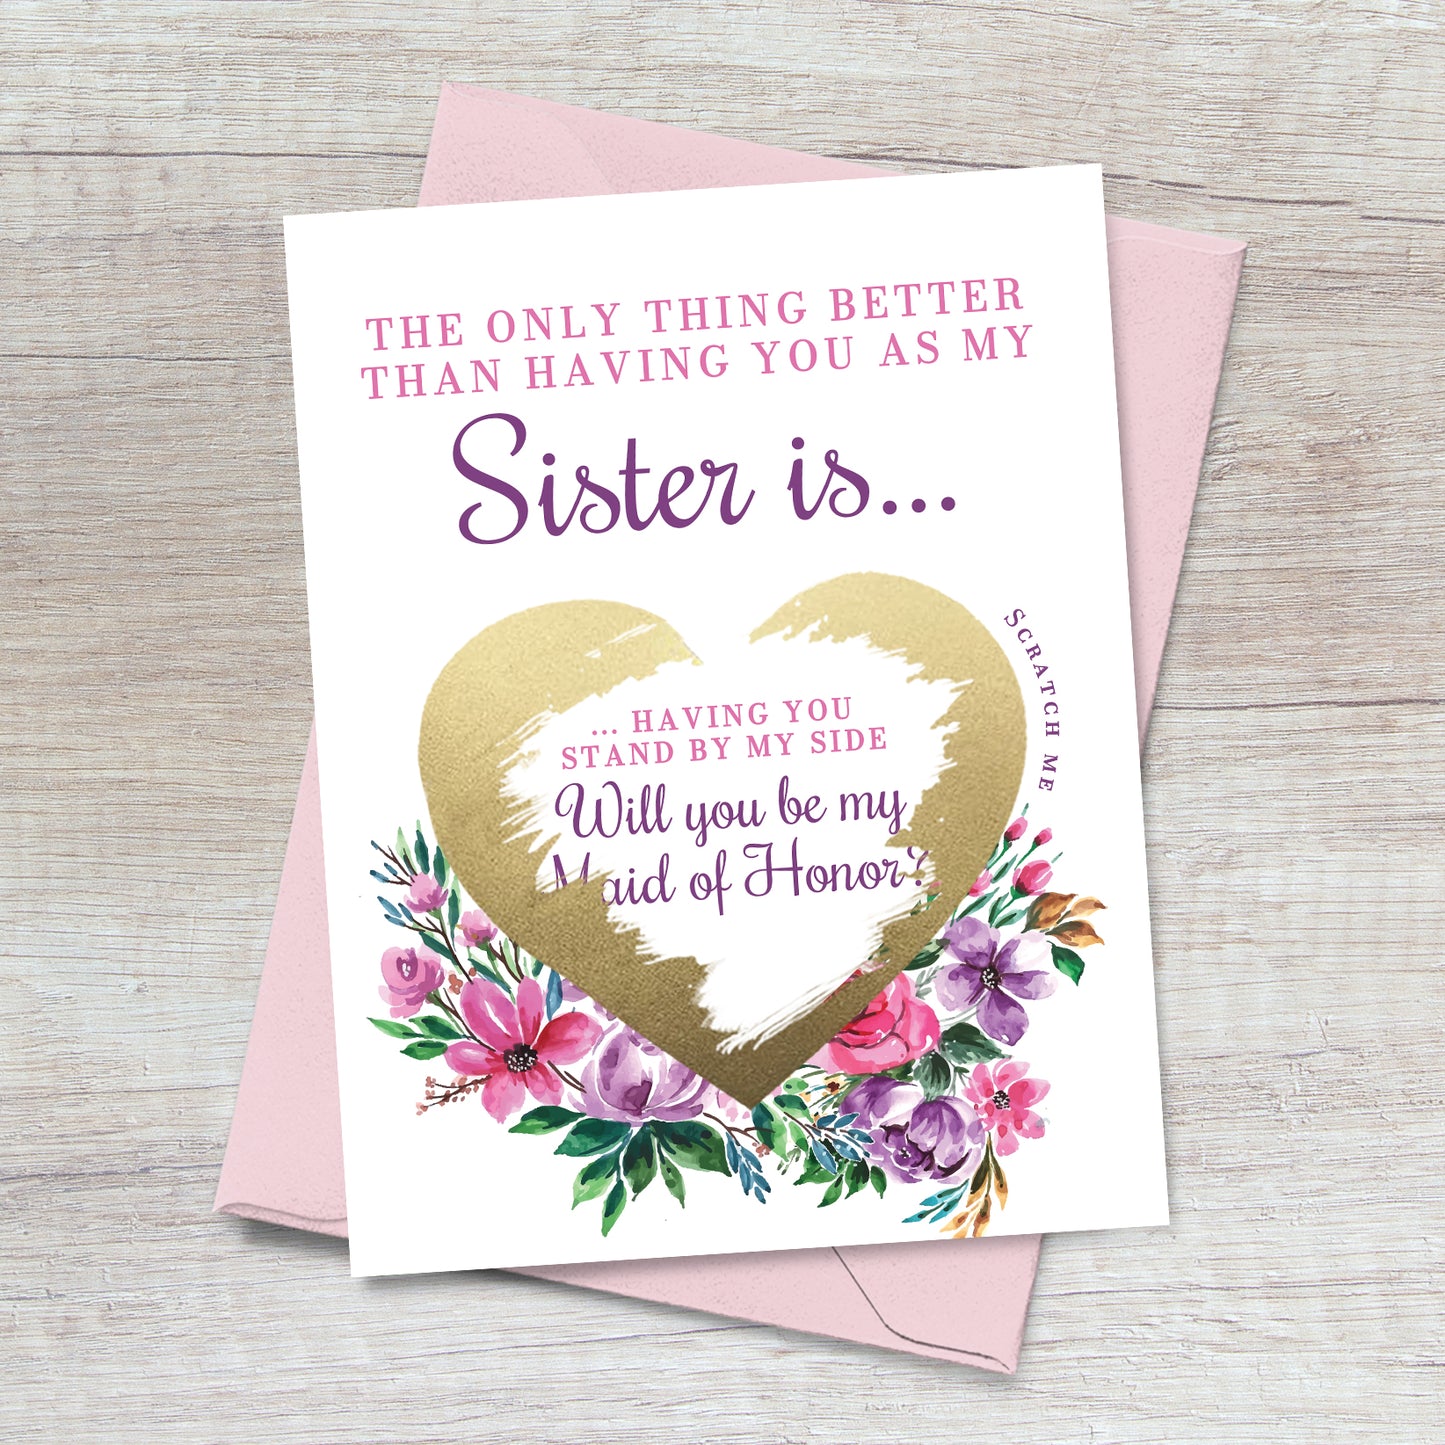 pink and purple will you be my maid of honor proposal card for sister with gold scratch-off heart - XOXOKristen